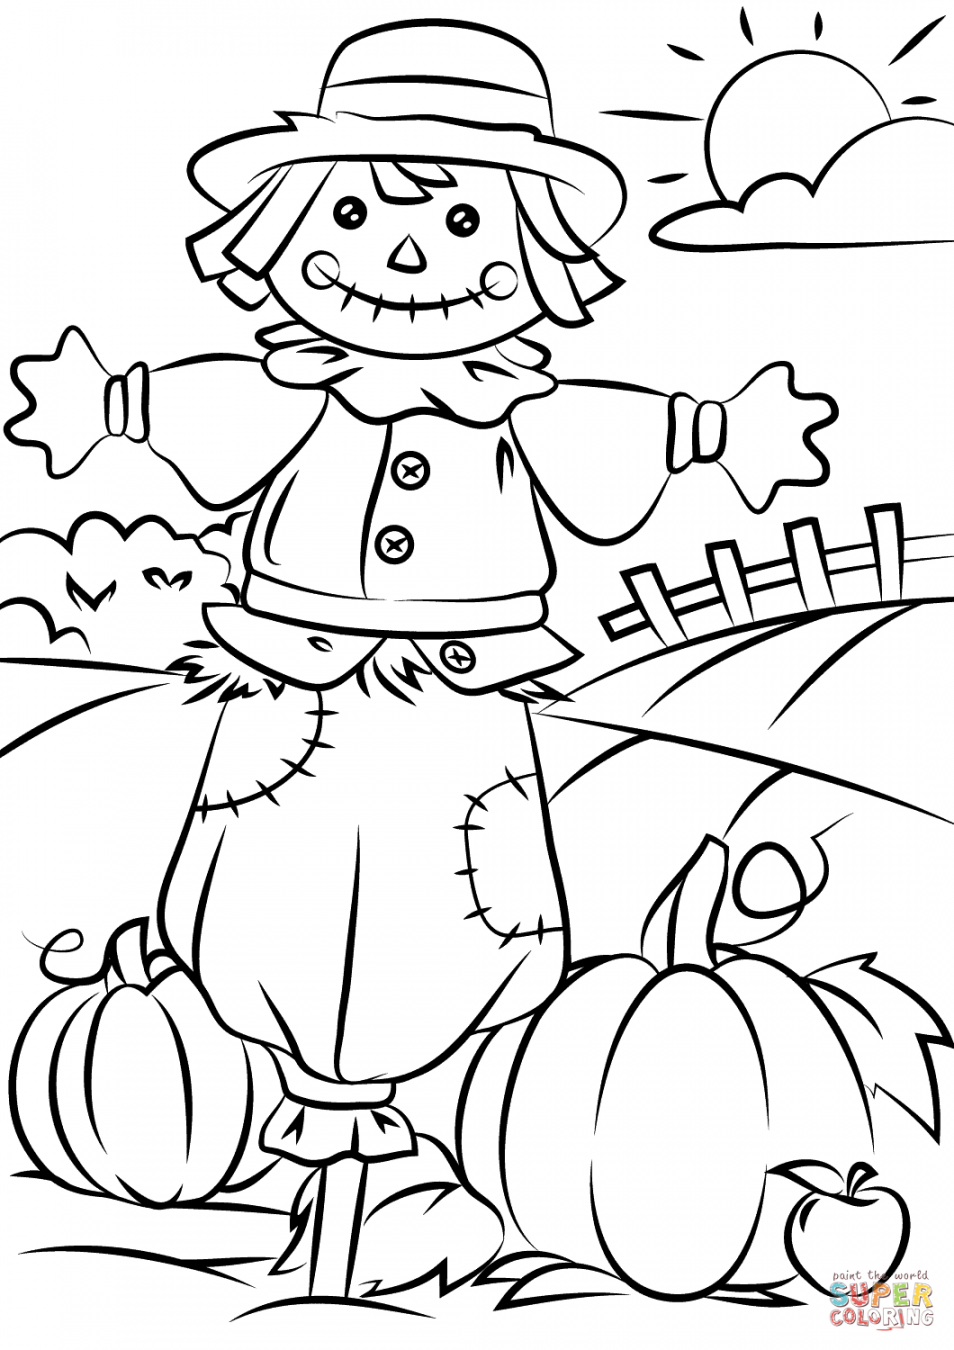 Free Printable Fall Color Pages - Printable - Autumn Scene with Scarecrow coloring page  Free Printable